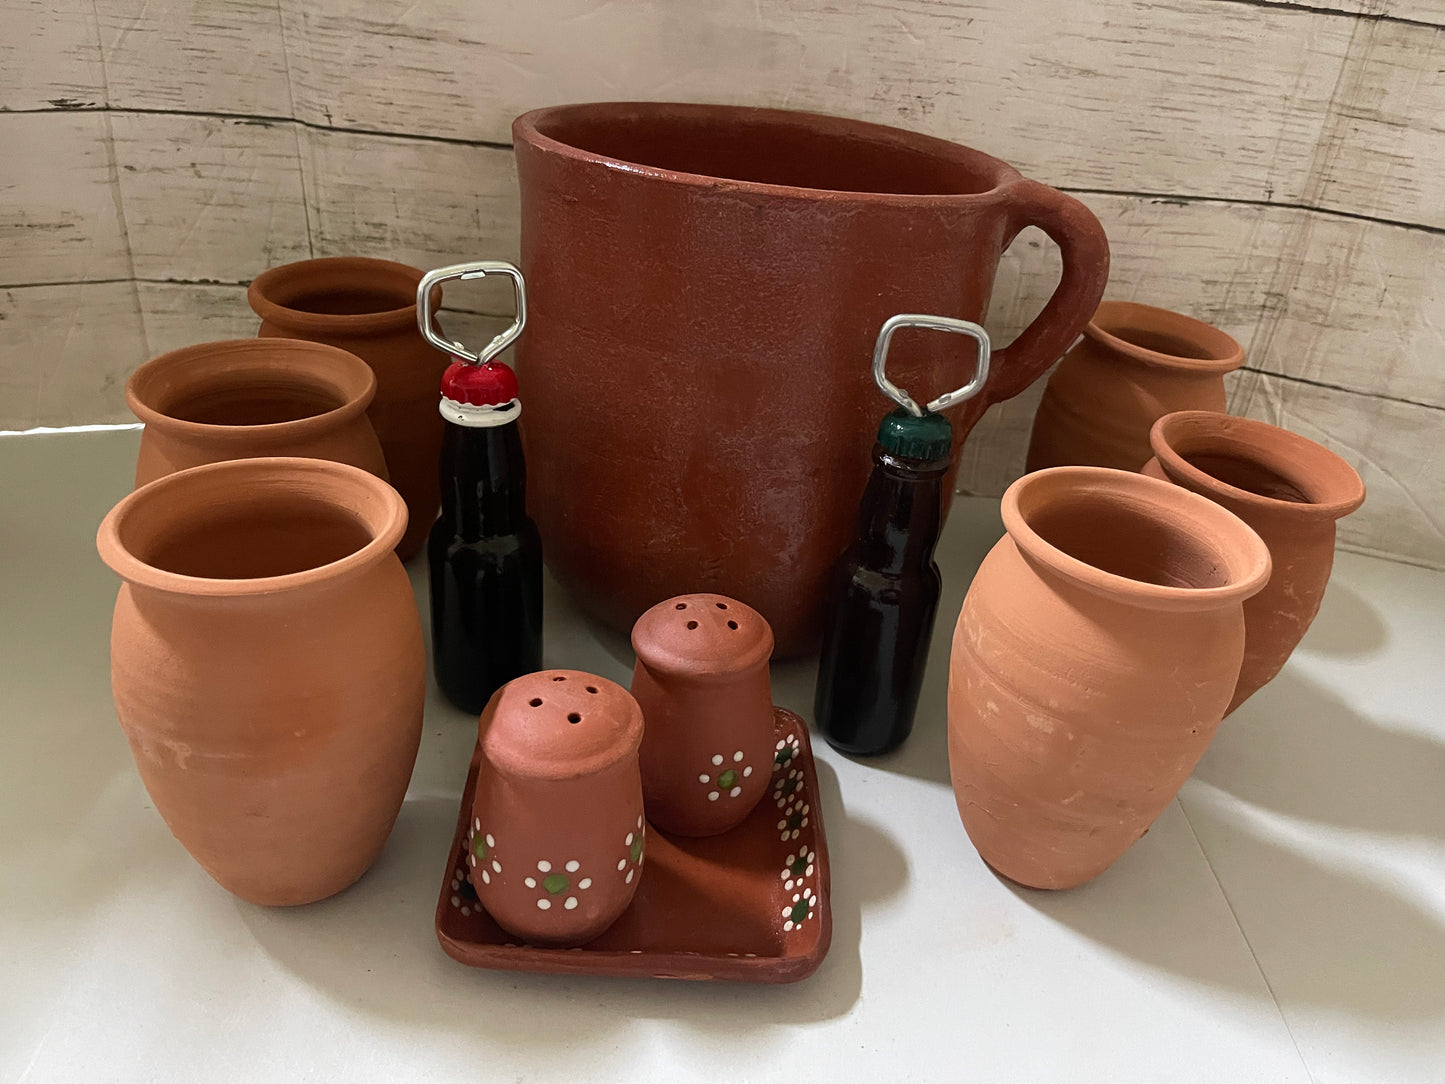 Party Set Mexicano/Mexico party pack/terracotta party pack/beer cooler/terracotta beer cooler pack/party gift set/mexico gift set